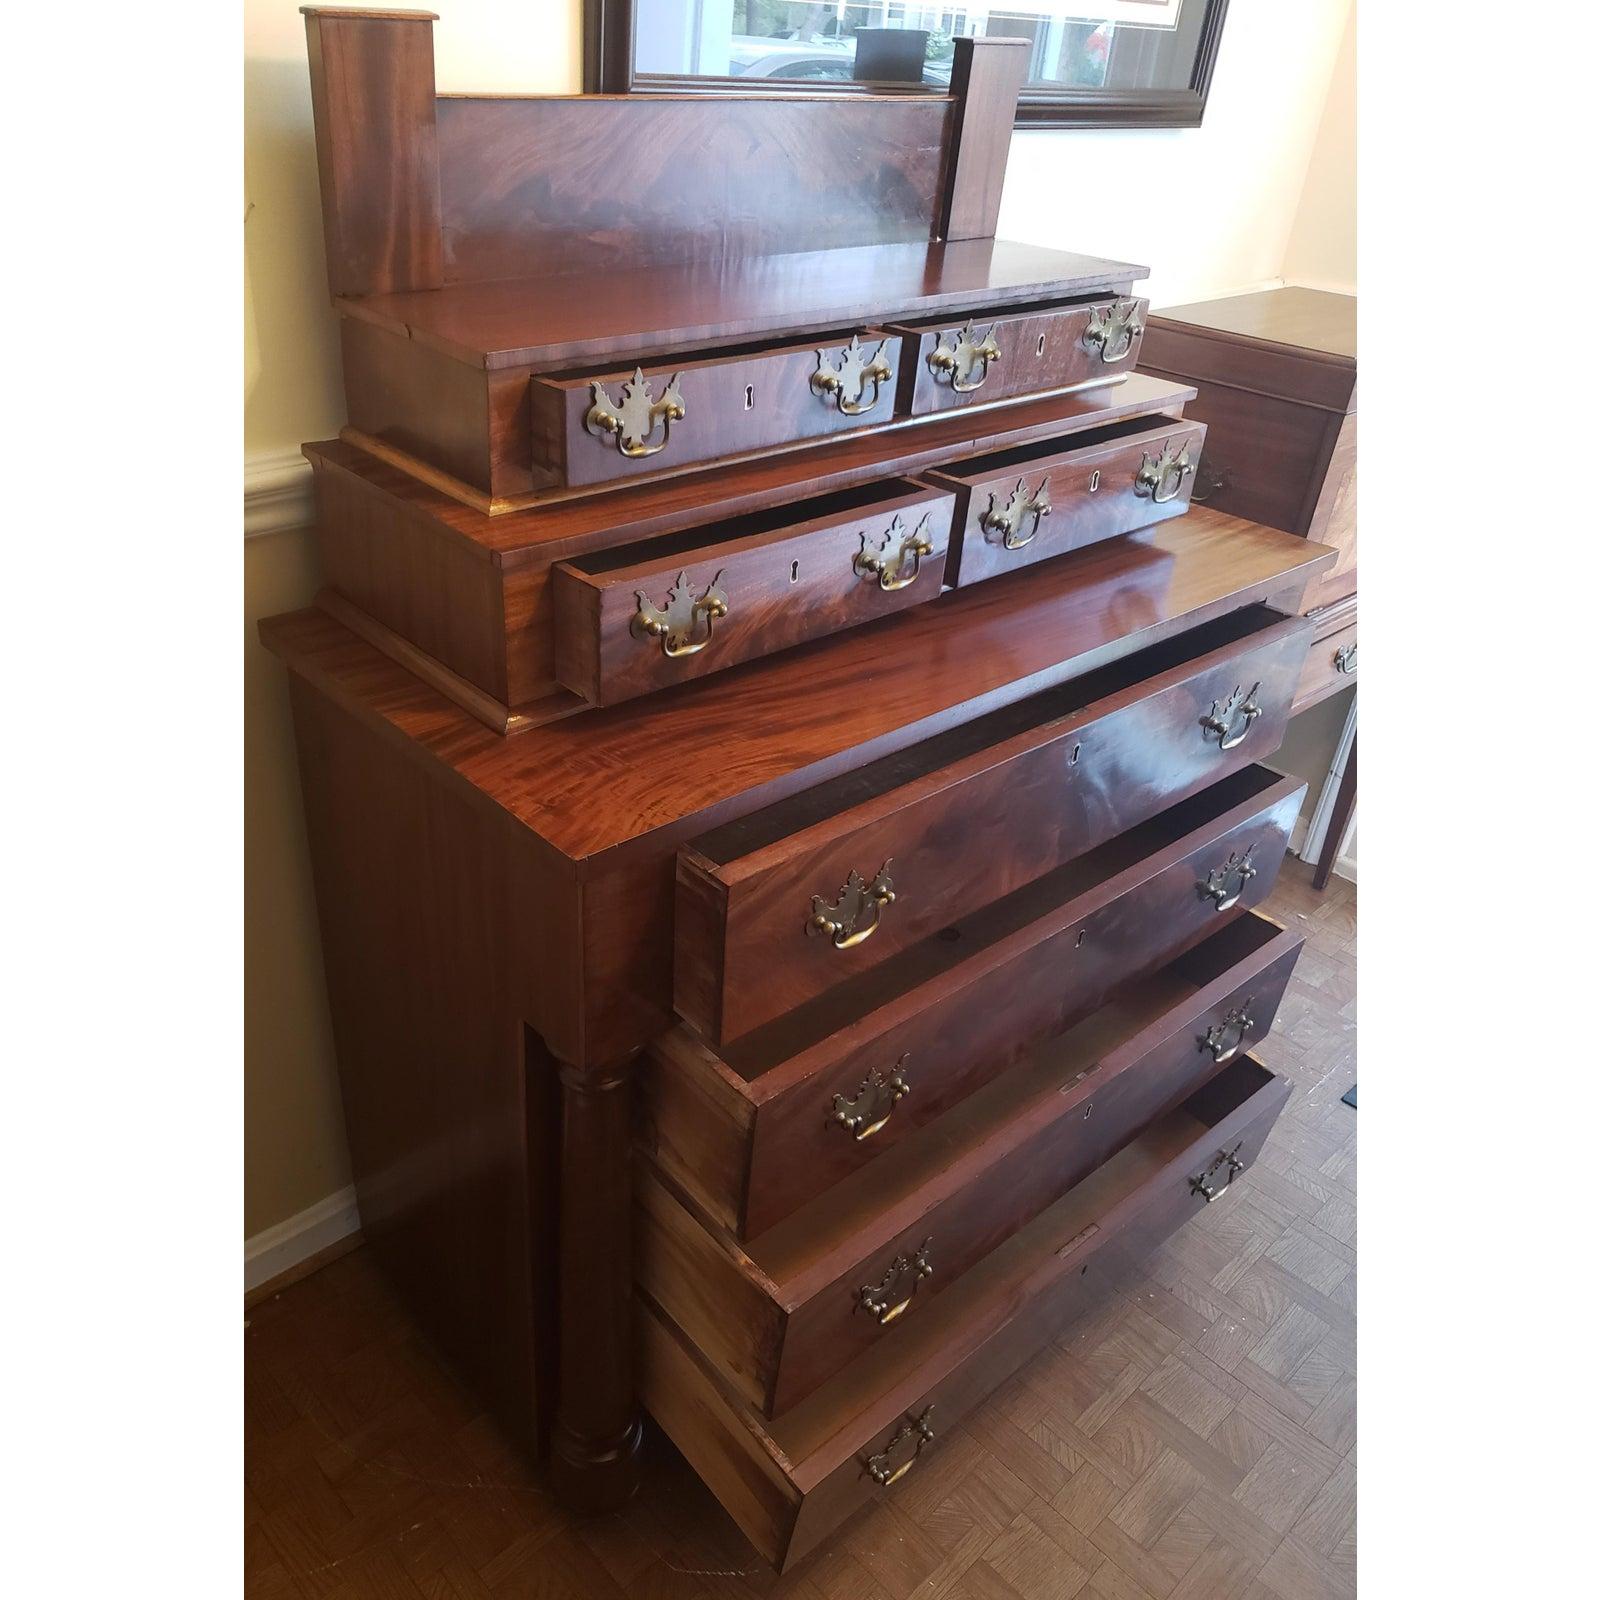 Late Victorian Late 1800s Mahogany Walnut Burl Bureau Chest of Drawers For Sale